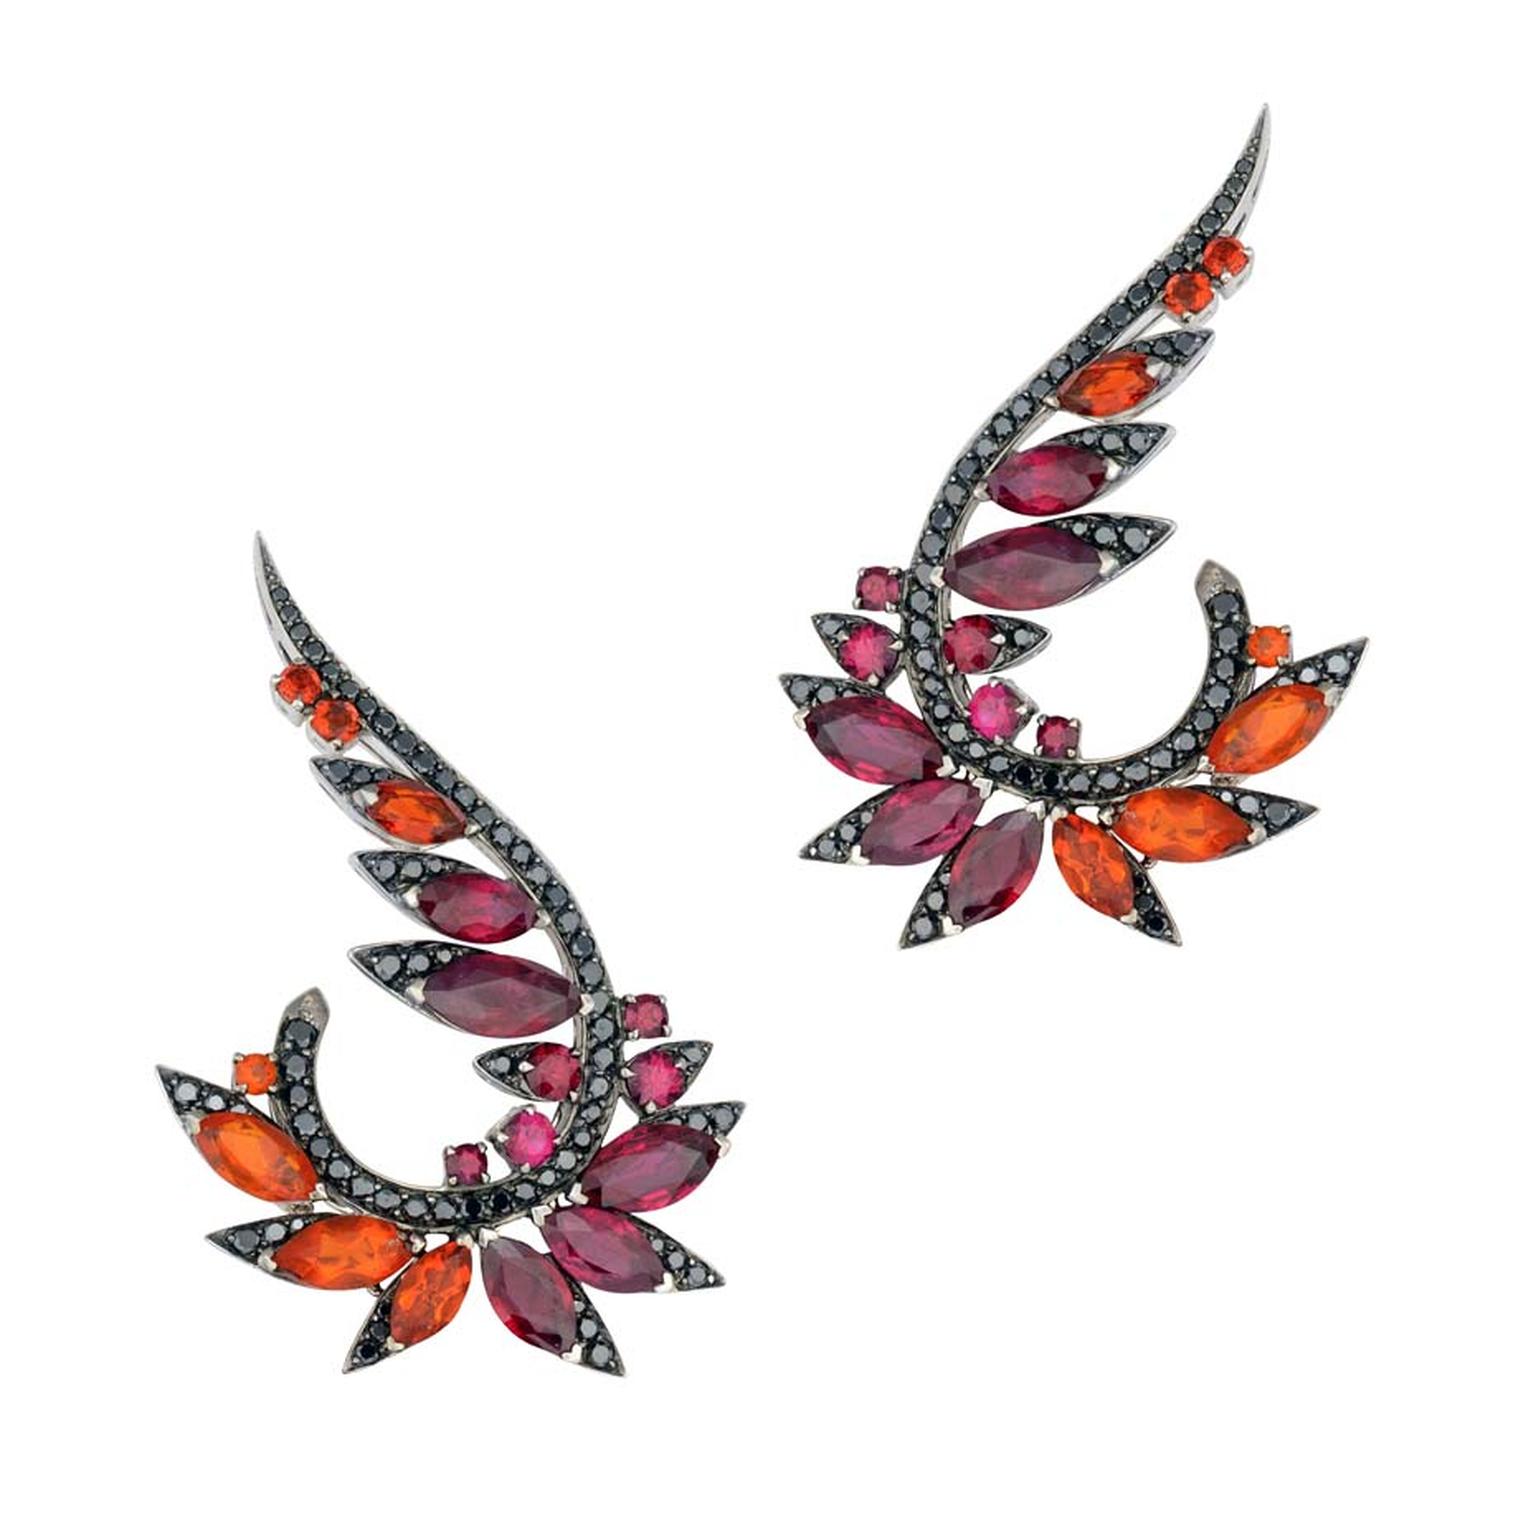 Stephen Webster's Magnipheasant plumage earrings in 18ct white gold, featuring marquise cut rubies, fire opals and black diamond pavé.